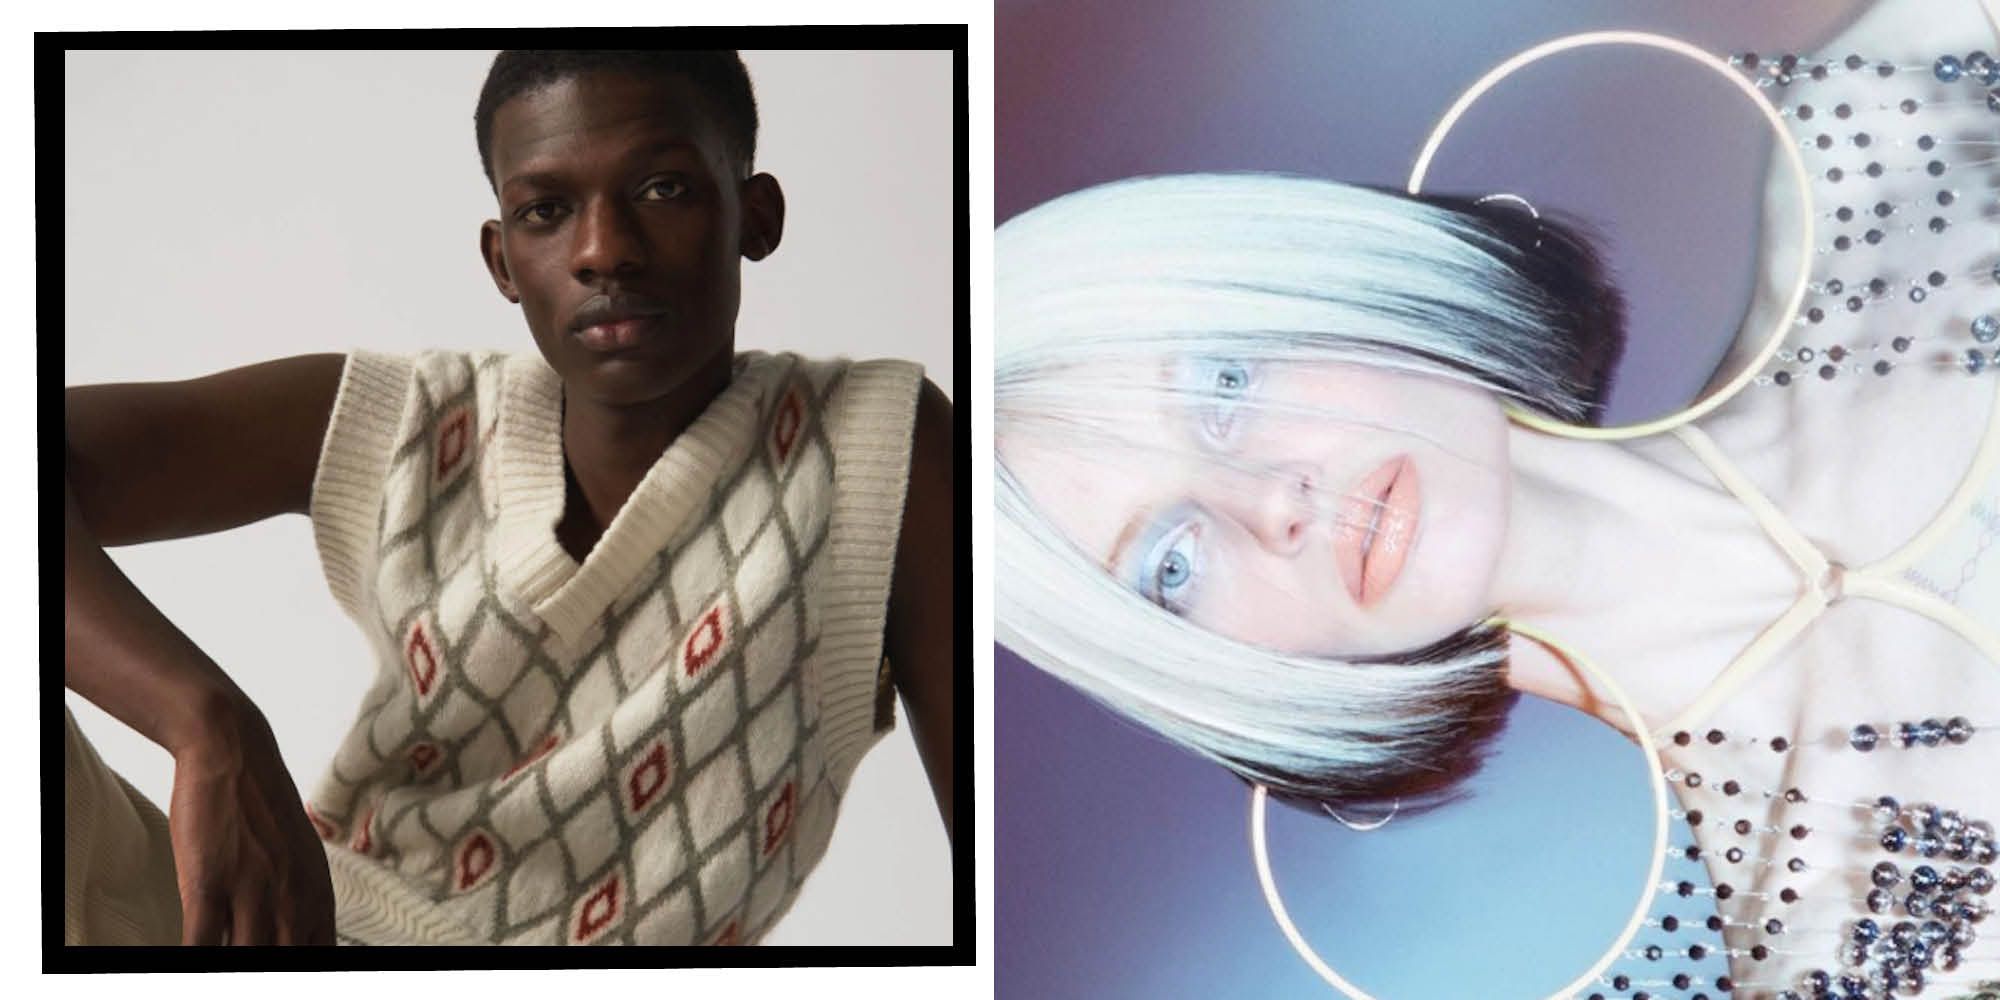 LVMH Prize Winner Revealed After 9 Finalists for 2021 Edition